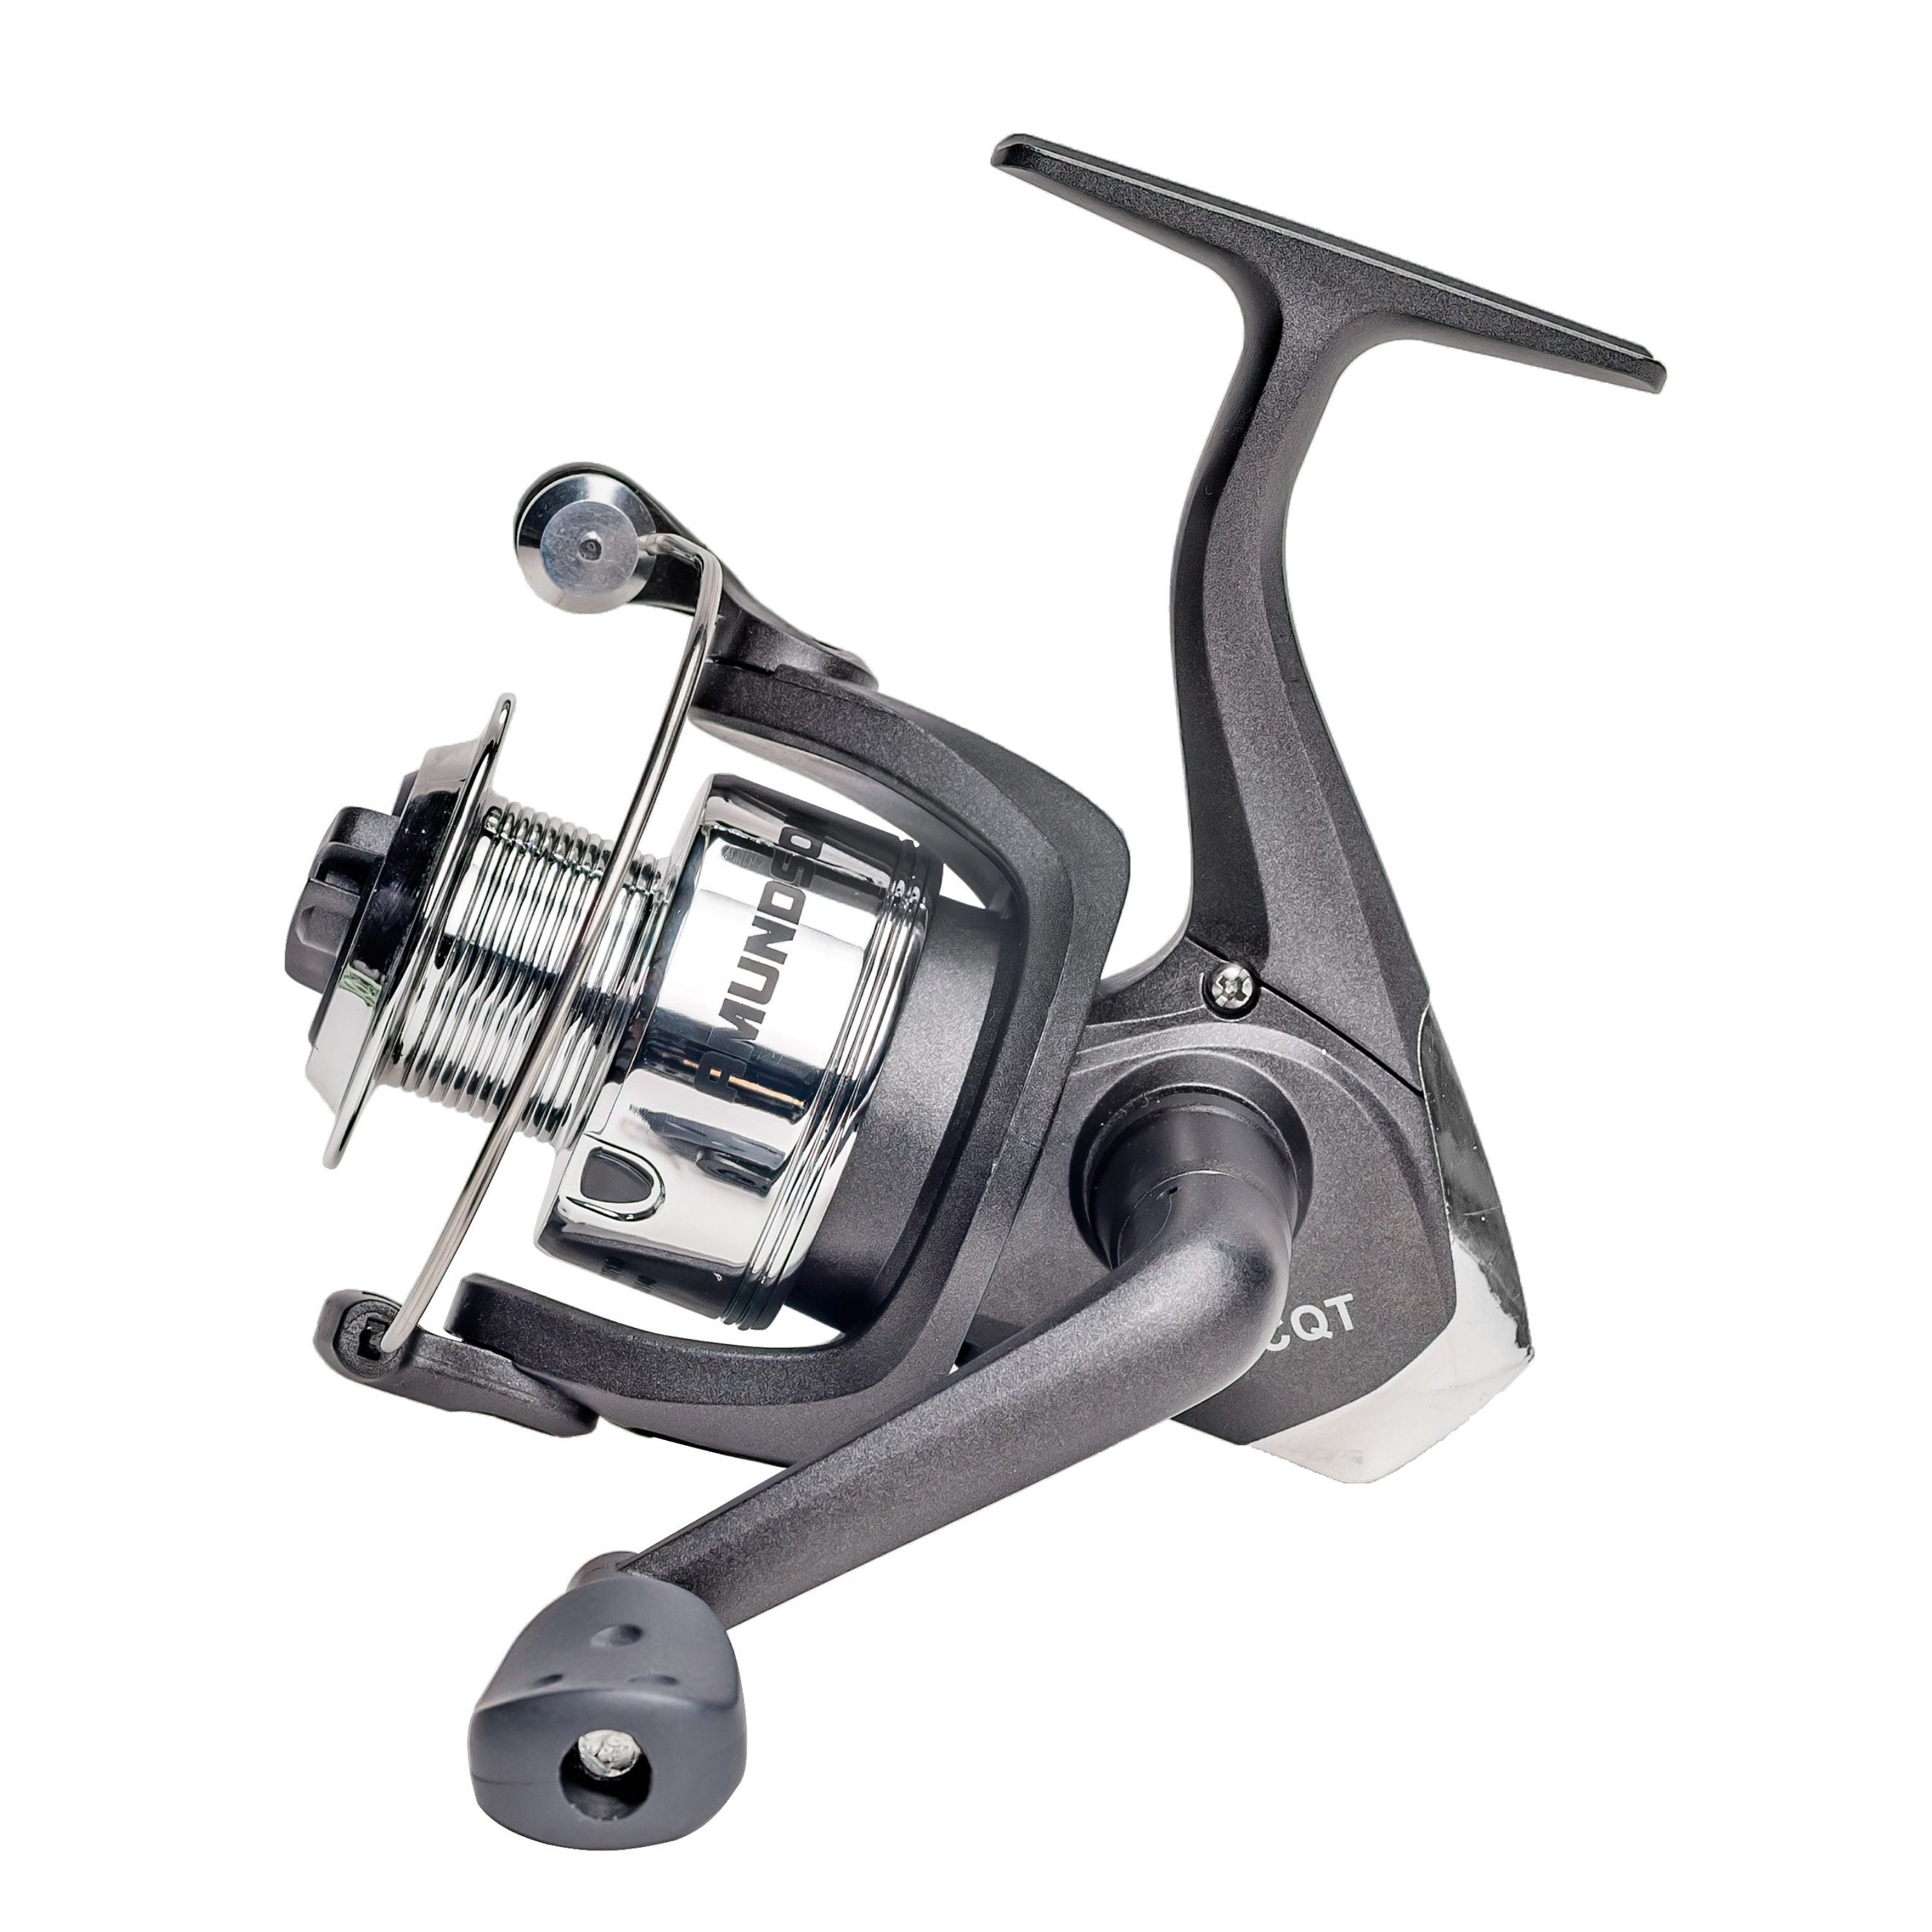 Moulinet lancer léger "Conquer"||"Conquer" Spinning reel